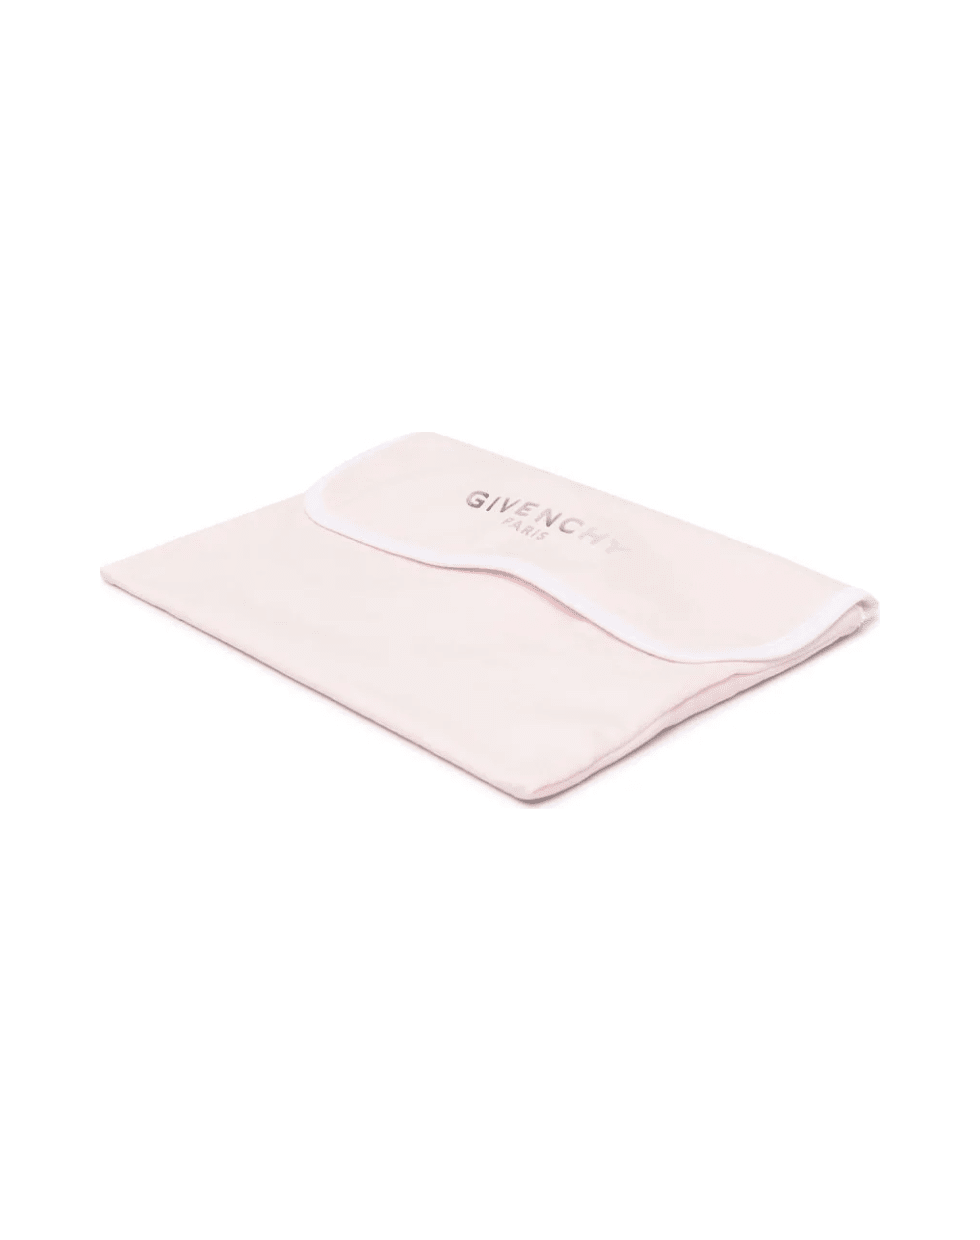 Givenchy White And Pink Baby Bibs Set With Logo - Bianco/rosa